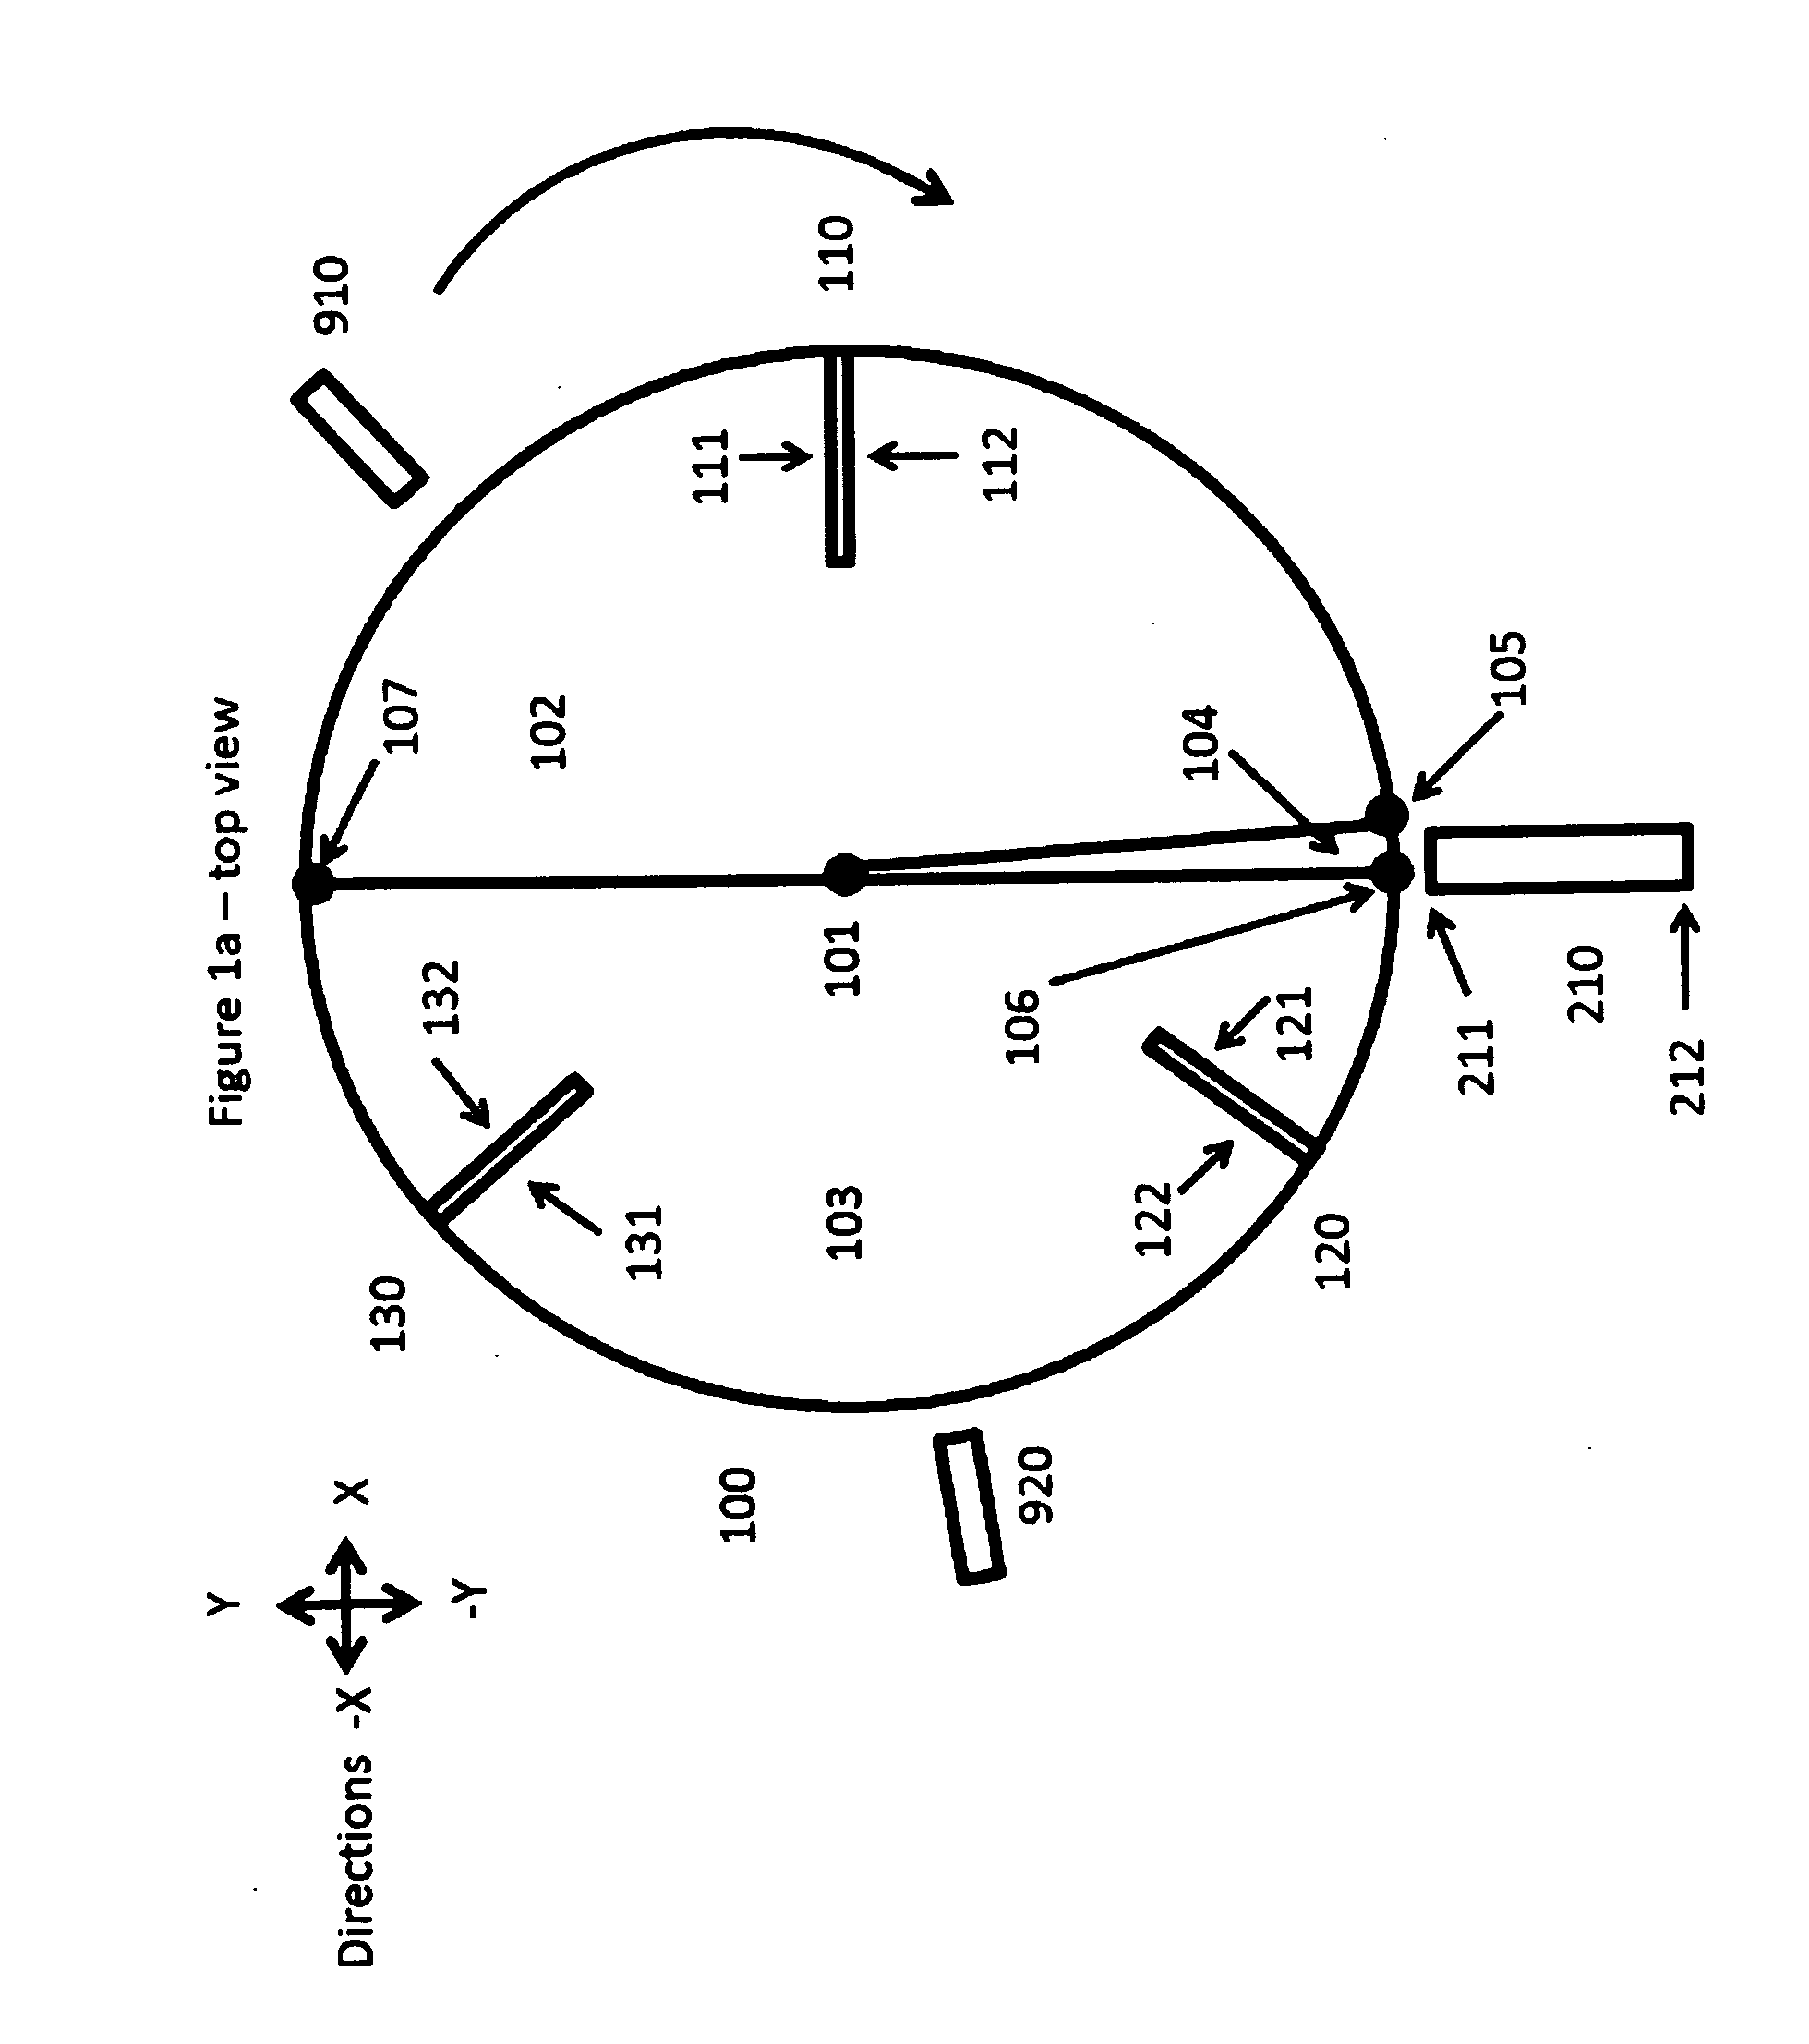 Method and apparatus for generating electrical and mechanical energy